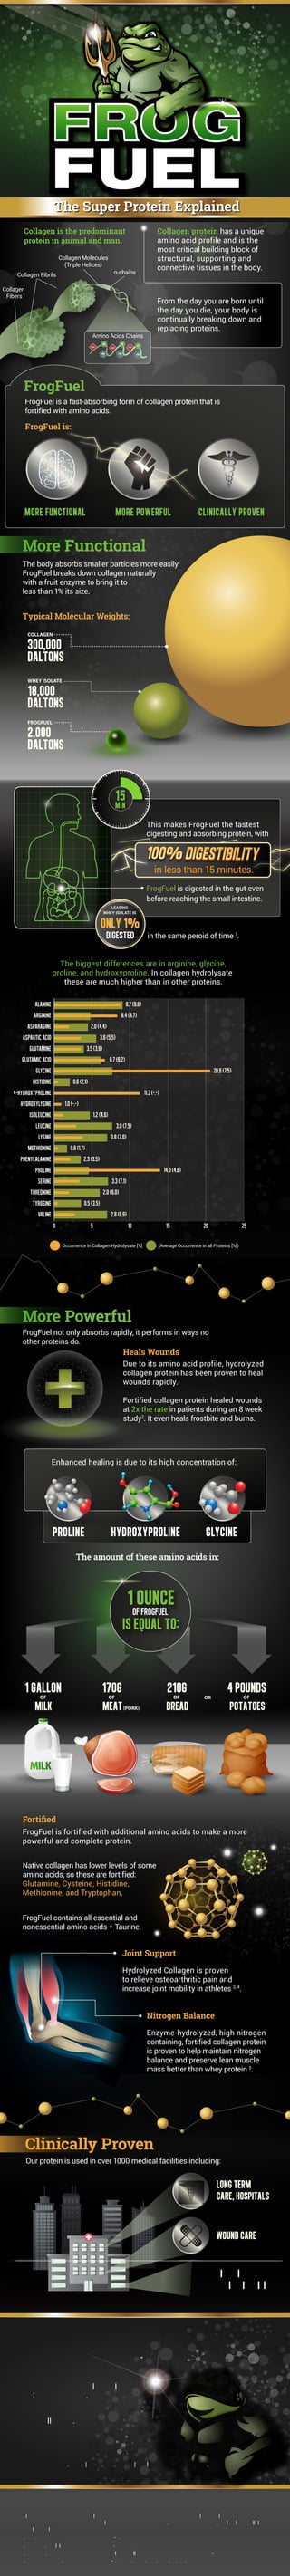 More Functional
Typical Molecular Weights:
The body absorbs smaller particles more easily.
FrogFuel breaks down collagen naturally
with a fruit enzyme to bring it to
less than 1% its size.
FROGFUEL
2,000
DALTONS
WHEY ISOLATE
18,000
DALTONS
COLLAGEN
300,000
DALTONS
FrogFuel is digested in the gut even
before reaching the small intestine.
This makes FrogFuel the fastest
digesting and absorbing protein, with
5 10 15 20 25
8.7(9.0)
8.4(4.7)
2.0(4.4)
3.6(5.5)
3.5(3.9)
6.7(6.2)
20.6(7.5)
0.6(2.1)
11.3(-.-)
1.0(-.-)
1.2(4.6)
3.0(7.5)
3.8(7.0)
0.6(1.7)
2.3(3.5)
14.0(4.6)
3.3(7.1)
2.0(6.0)
0.5(3.5)
2.8(6.9)
Alanine
Arginine
Asparagine
Aspartic acid
Glutamine
Glutamic acid
Glycine
Histidine
4-Hydroxyproline
Hydroxylysine
Isoleucine
Leucine
Lysine
Methionine
Phenylalanine
Proline
Serine
Threonine
Tyrosine
Valine
Occurrence in Collagen Hydrolysate [%] (Average Occurrence in all Proteins [%])
0
The biggest differences are in arginine, glycine,
proline, and hydroxyproline. In collagen hydrolysate
these are much higher than in other proteins.
OF
1 GALLON
MILK
OF
210G
BREAD
OF
4 POUNDS
POTATOES
OROF
170G
MEAT(PORK)
1 OUNCE
IS EQUAL TO:
OF FROGFUEL
More Powerful
FrogFuel not only absorbs rapidly, it performs in ways no
other proteins do.
Due to its amino acid profile, hydrolyzed
collagen protein has been proven to heal
wounds rapidly.
Fortified collagen protein healed wounds
at 2x the rate in patients during an 8 week
study2
. It even heals frostbite and burns.
Native collagen has lower levels of some
amino acids, so these are fortified:
Glutamine, Cysteine, Histidine,
Methionine, and Tryptophan.
FrogFuel contains all essential and
nonessential amino acids + Taurine.
Heals Wounds
FrogFuel is fortified with additional amino acids to make a more
powerful and complete protein.
Fortiﬁed
Enzyme-hydrolyzed, high nitrogen
containing, fortified collagen protein
is proven to help maintain nitrogen
balance and preserve lean muscle
mass better than whey protein 5
.
Nitrogen Balance
Enhanced healing is due to its high concentration of:
The amount of these amino acids in:
PROLINE HYDROXYPROLINE GLYCINE
Collagen is the predominant
protein in animal and man.
From the day you are born until
the day you die, your body is
continually breaking down and
replacing proteins.
FrogFuel
FrogFuel is a fast-absorbing form of collagen protein that is
fortified with amino acids.
FrogFuel is:
MORE FUNCTIONAL MORE POWERFUL CLINICALLY PROVEN
Collagen
Fibers
Collagen Fibrils
Collagen Molecules
(Triple Helices)
α-chains
HYP HYP HYP
PRO PROPRO
GLY GLY
GLY
HYP HYP HYP
PRO PROPRO
GLY GLY
GLY
Amino Acids Chains
LONG TERM
CARE, HOSPITALS
WOUND CARE
DIALYSIS &
BARIATRIC CLINICS
Clinically Proven
Our protein is used in over 1000 medical facilities including:
FrogFuel has everything you need,
nothing you don’t.
Frogperformance.com | 888.448.8468 | sales@frogperformance.com
Reference:
1. In Vitro Protein Digestion Profile Comparisons of Frog Performance’s FrogFuel with Selected Competitors
Products Under the Conditions Similar to Human Digestive Tract. Kennesaw State Dept. Molecular & Cellular
Biology July 2015
2. Adv. Skin Woundcare: 2006 Mar;19(2):92-6.
3. Beuker F. et al; Int J Sportsmedicine 1: 1-88
4. Adam, M.; “What are the effects of hydrolyzed collagen?” in: Therapiewoche 41: 2456-61
5. J Am Diet Assoc. 2009 Jun;109(6):1082-7. doi: 10.1016/j.jada.2009.03.003.
The Super Protein ExplainedThe Super Protein Explained
Collagen protein has a unique
amino acid profile and is the
most critical building block of
structural, supporting and
connective tissues in the body.
ONLY 1%
DIGESTED
LEADING
WHEY ISOLATE IS
Copyright © 2015 Frog Performance
in the same peroid of time 1
.
Hydrolyzed Collagen is proven
to relieve osteoarthritic pain and
increase joint mobility in athletes 3, 4
.
Joint Support
in less than 15 minutes.
15
MIN
NO GMOs, Sugars, Fats,
Carbohydrates, Cholesterol,
Gluten or Lactose.
Safe for persons with diabetes
and allergies.
 